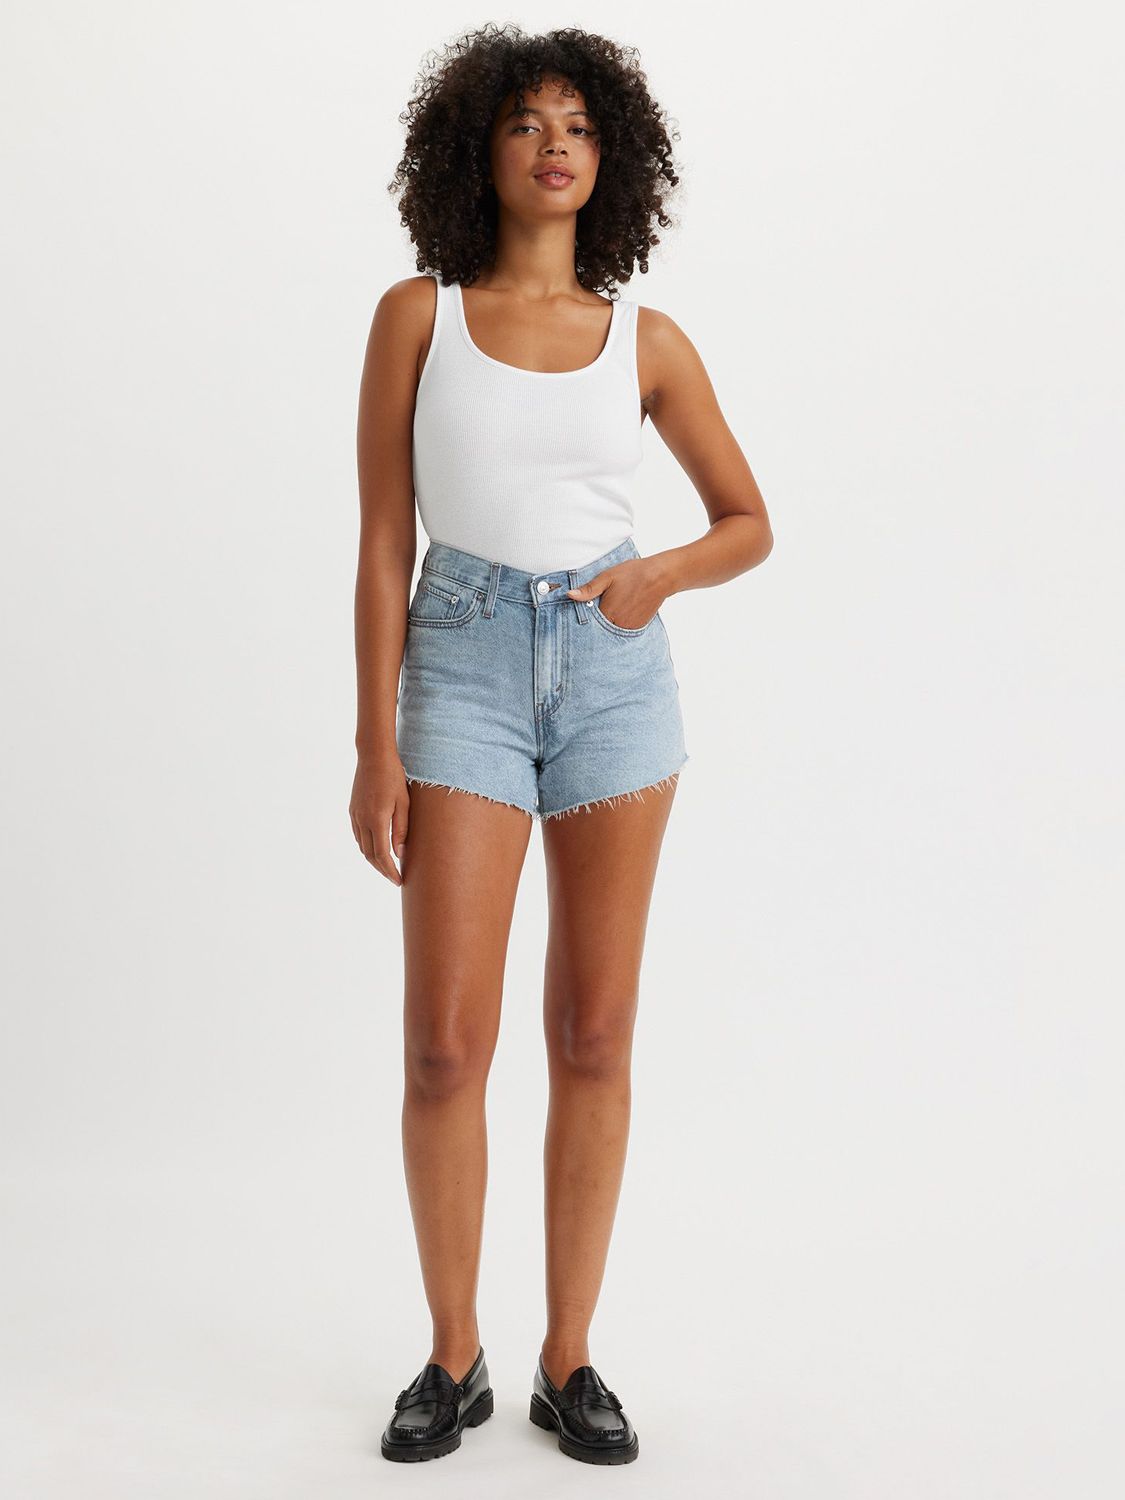 Levi's® Fit Guide: Women's Shorts Edition